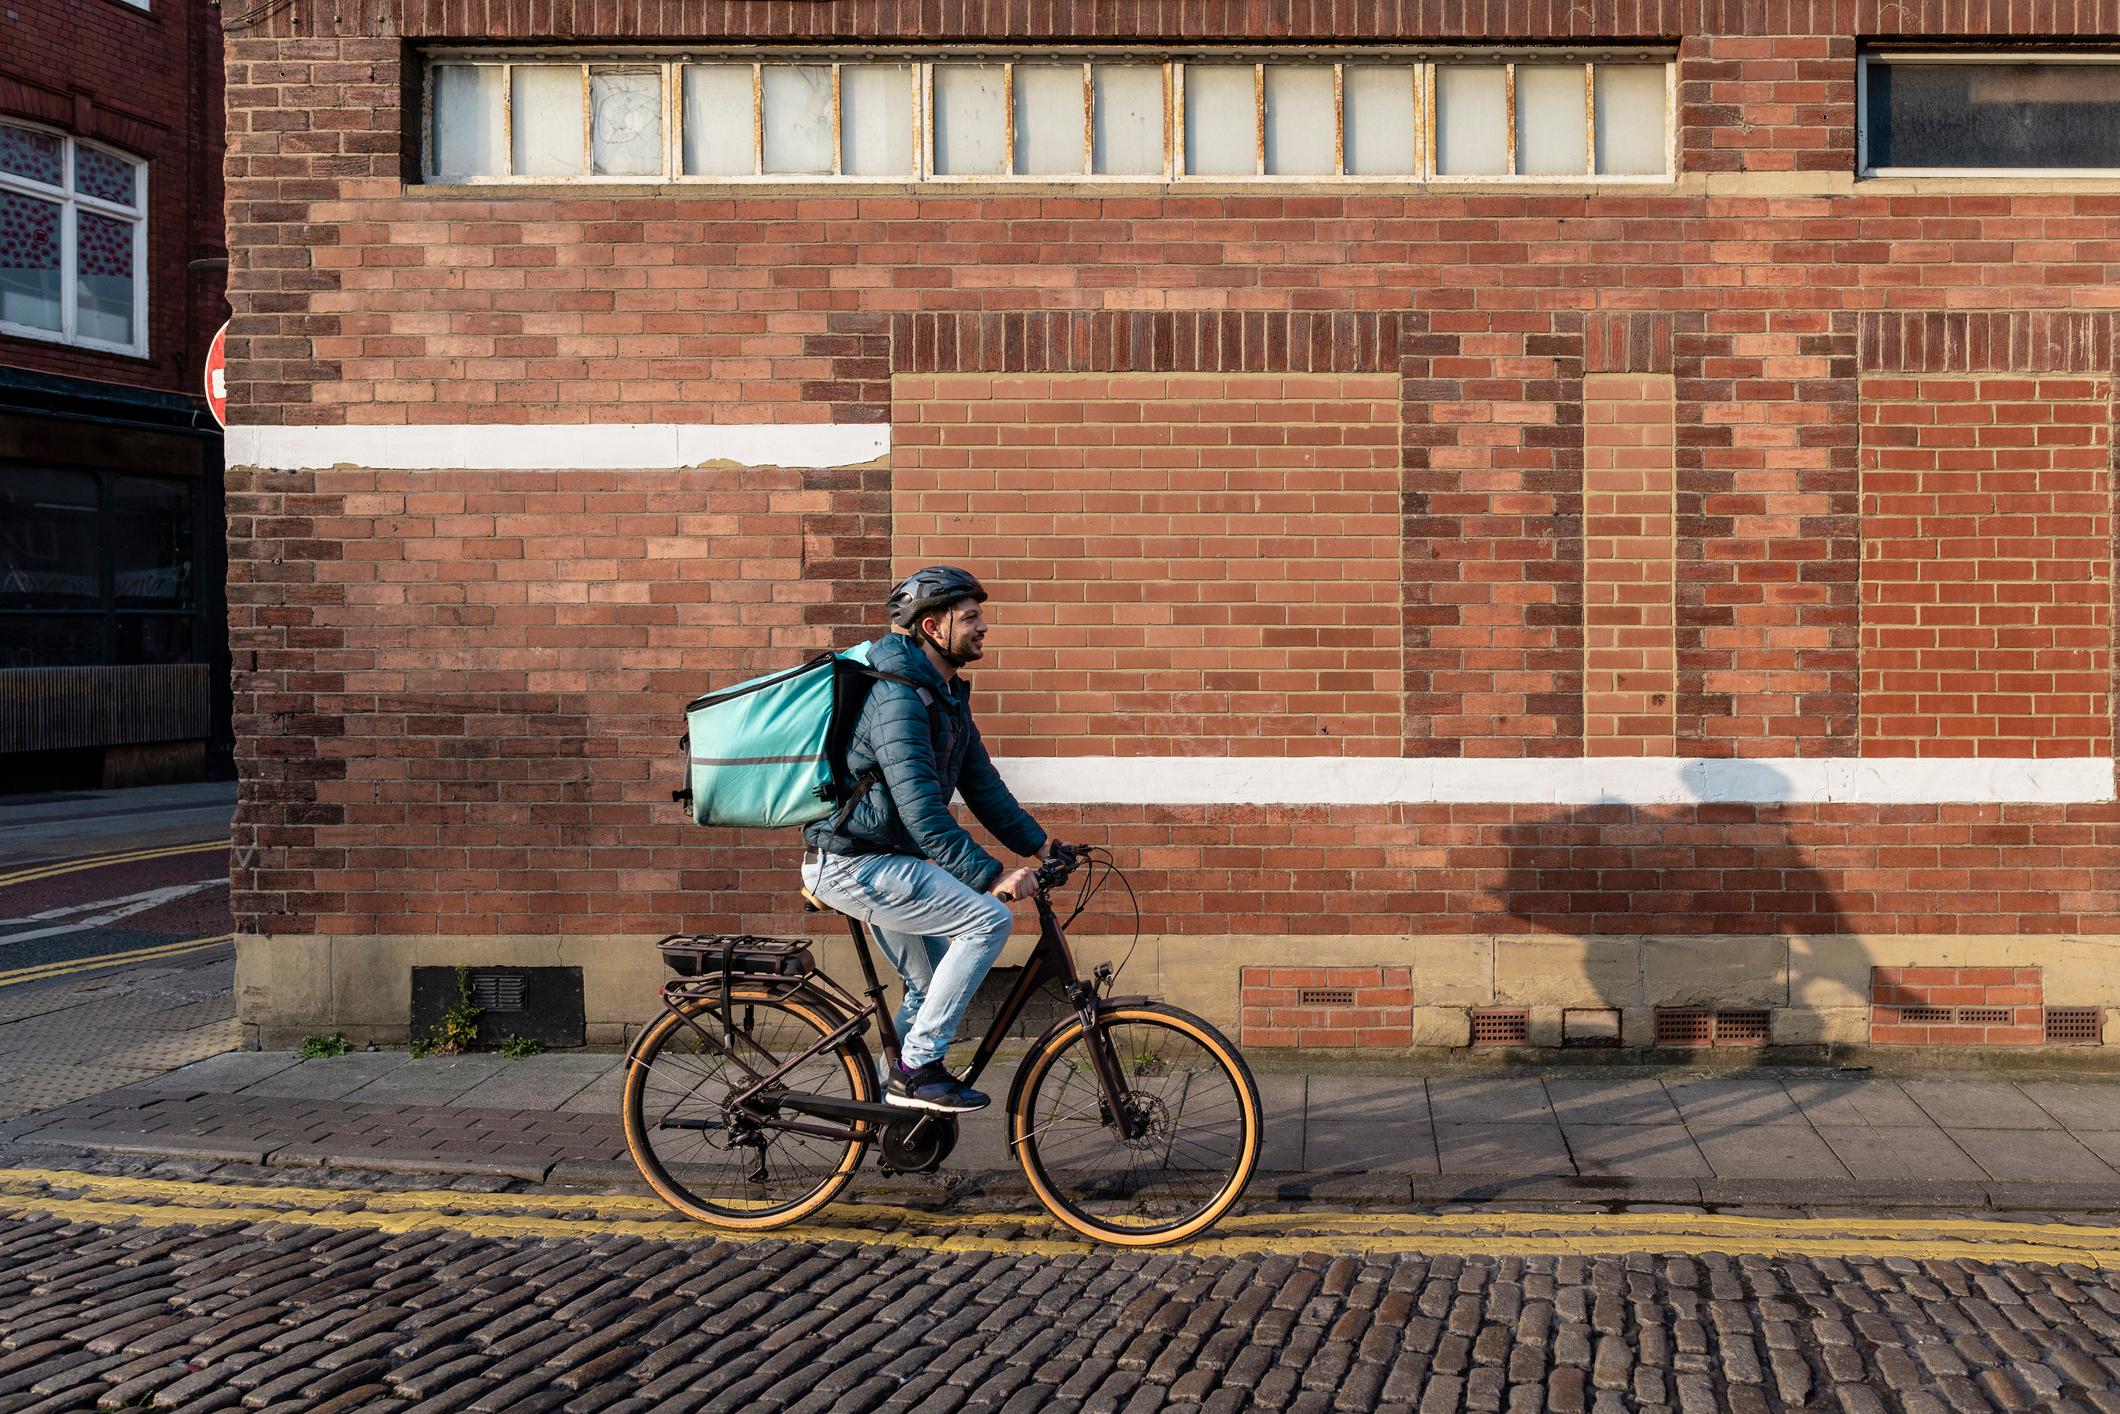 A delivery man wearing a bicycle helmet and food delivery bag, riding his bike on a cobbled road.